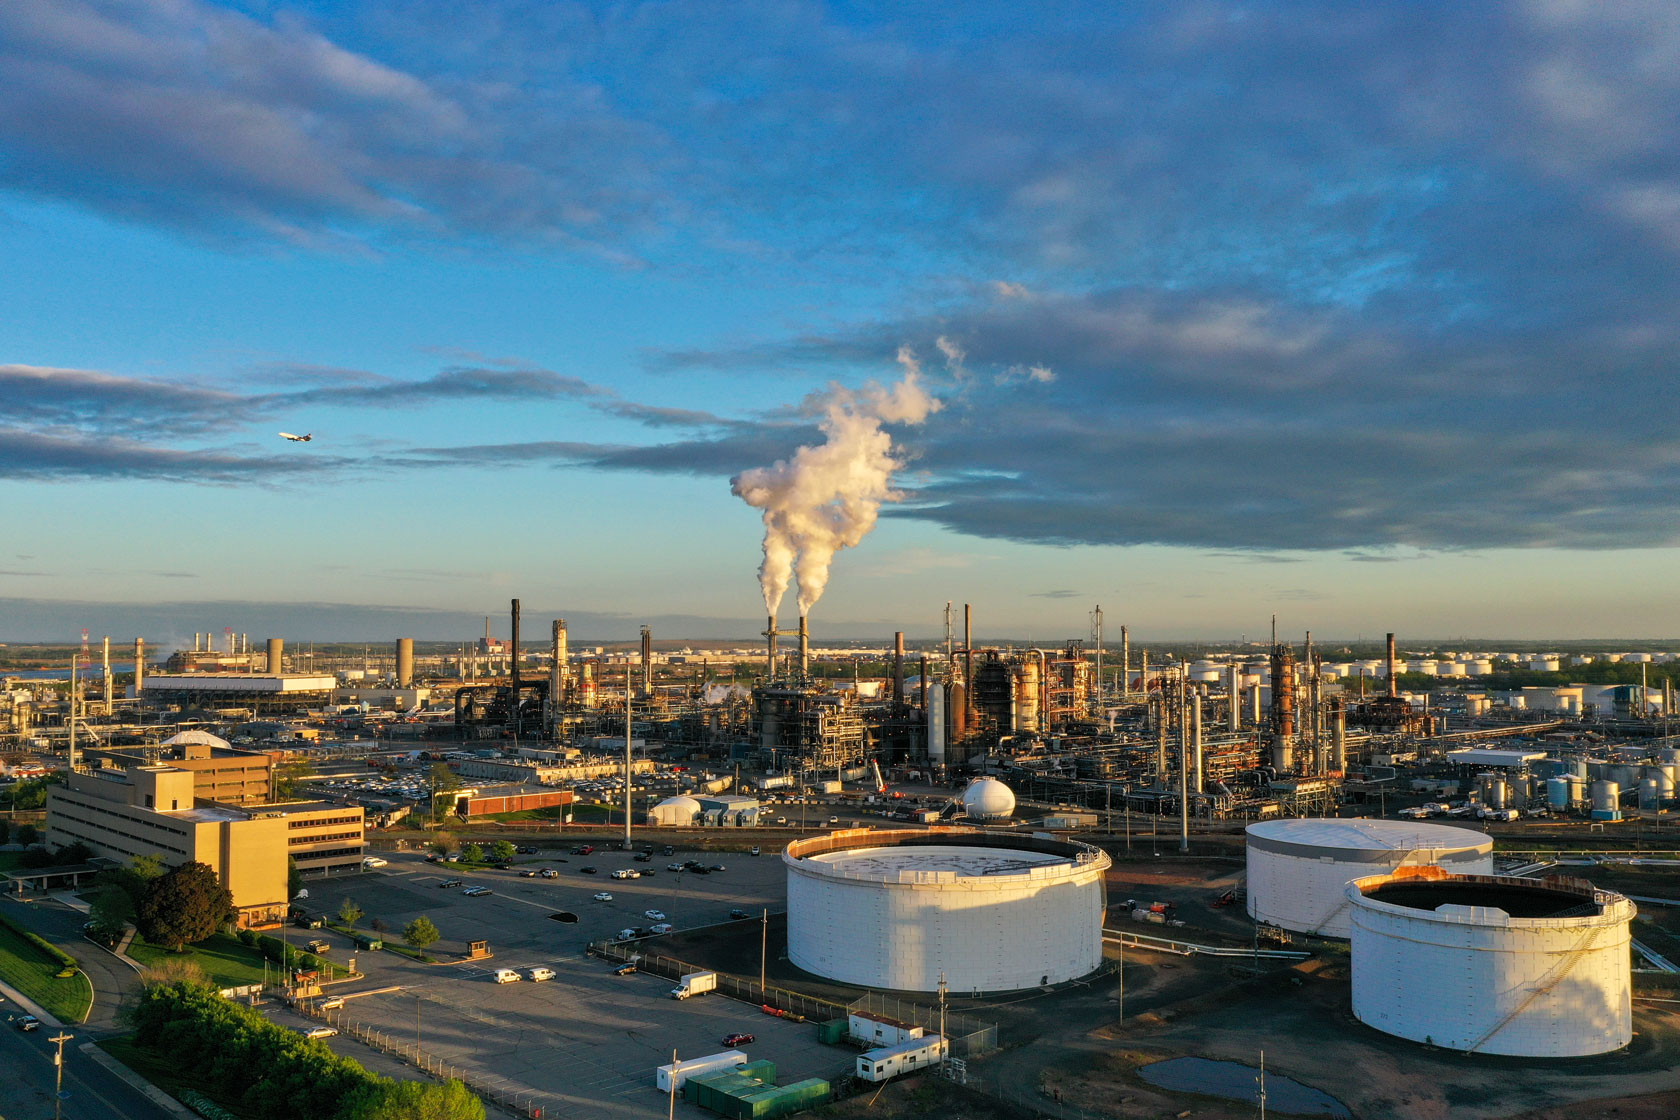 A Linden, New Jersey, oil refinery is pictured.